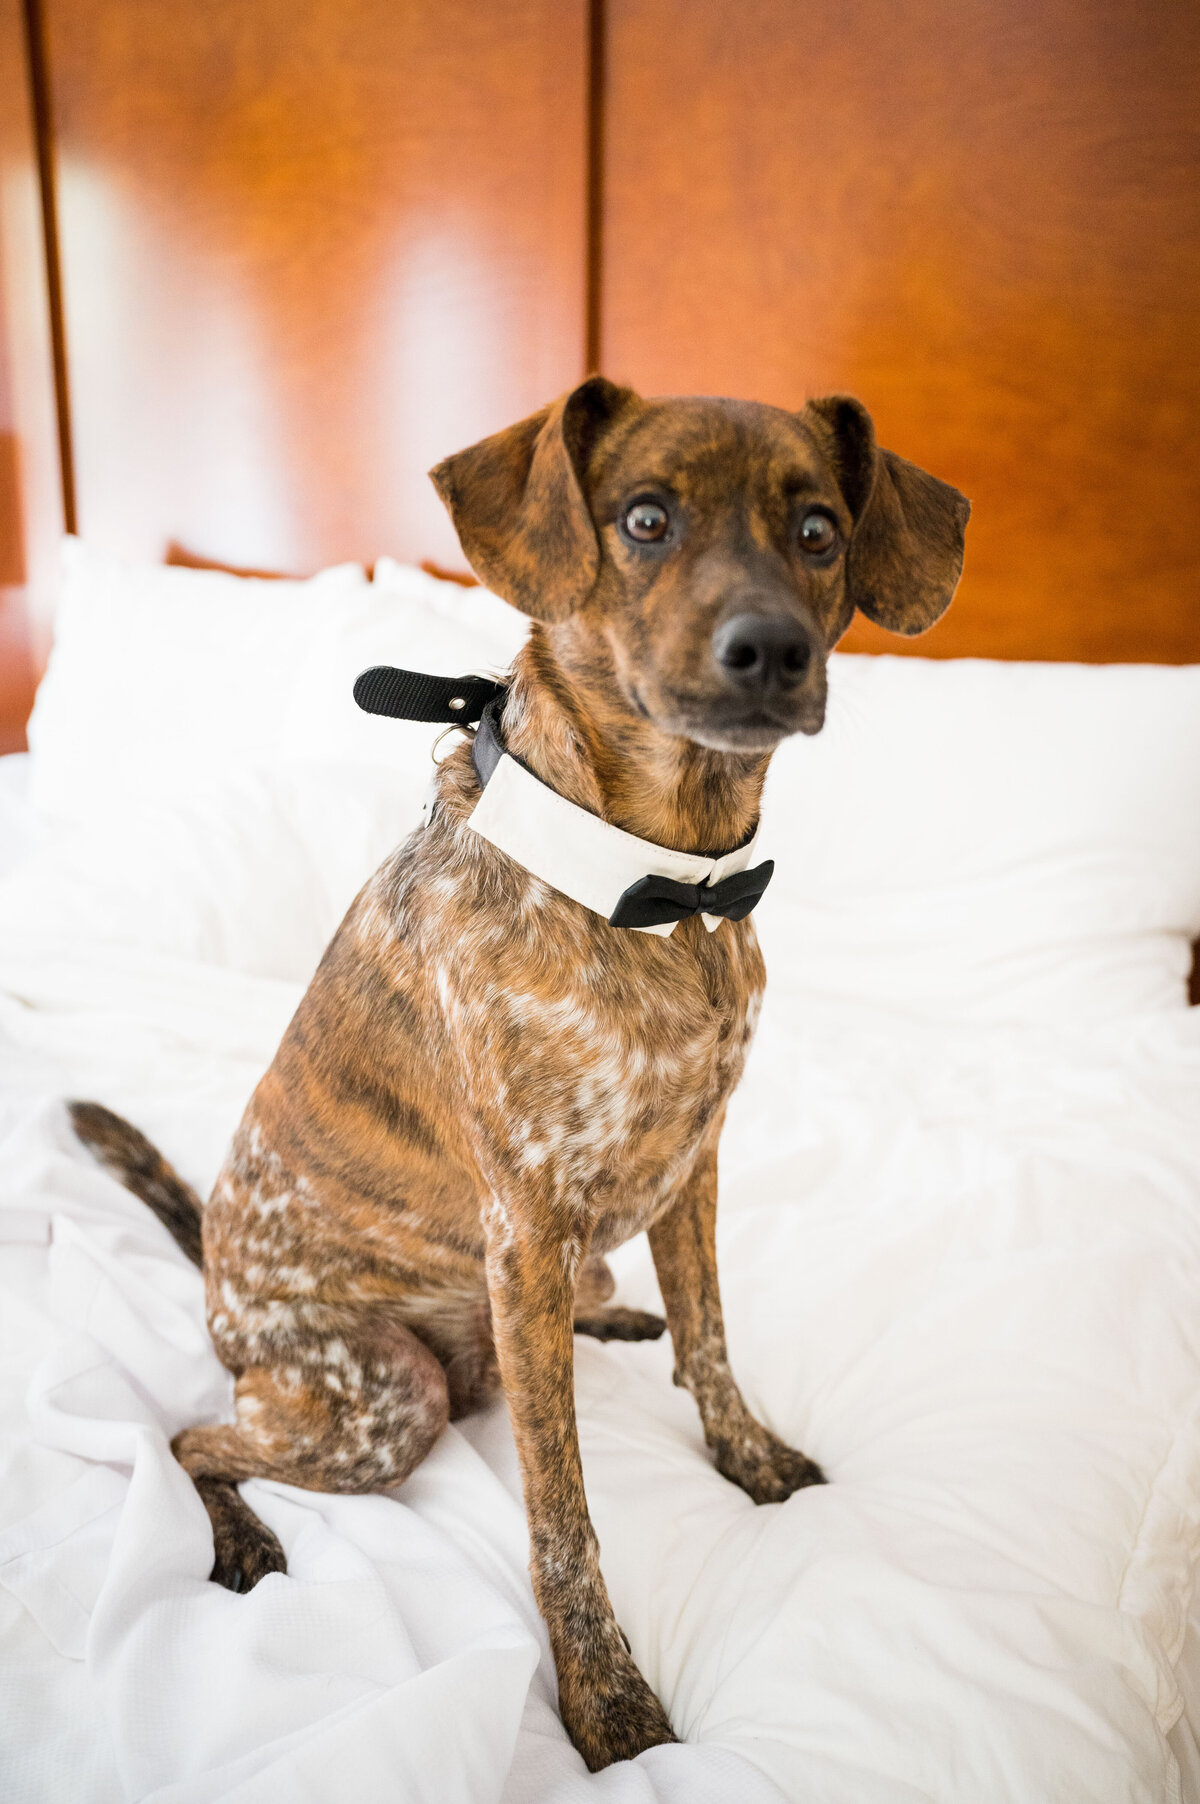 A dog with a tuxedo bowtie sits on a hotel bed.